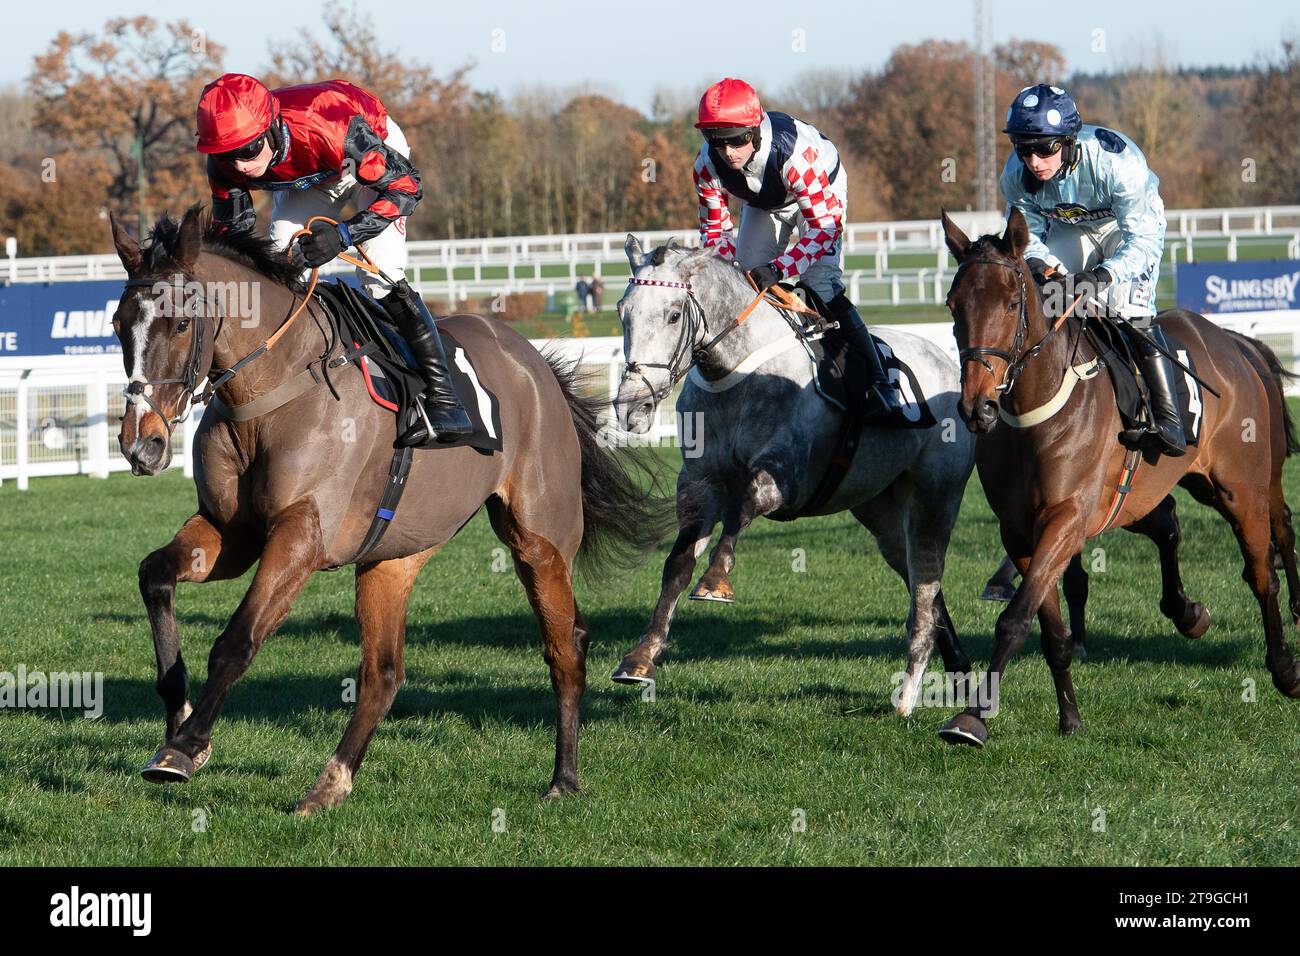 Ascot, Berkshire, UK. 25h November, 2023. Horse Farnoge ridden by jockey Harry Cobden clear a hurdle before winning the Bet With Ascot Donation Box Scheme Novices’ Hurdle Race at Ascot Racecourse at the November Racing Saturday Meeting. Owner JCG Chia & I Warwick. Trainer Paul Nicholls, Ditcheat. Credit: Maureen McLean/Alamy Live News Stock Photo